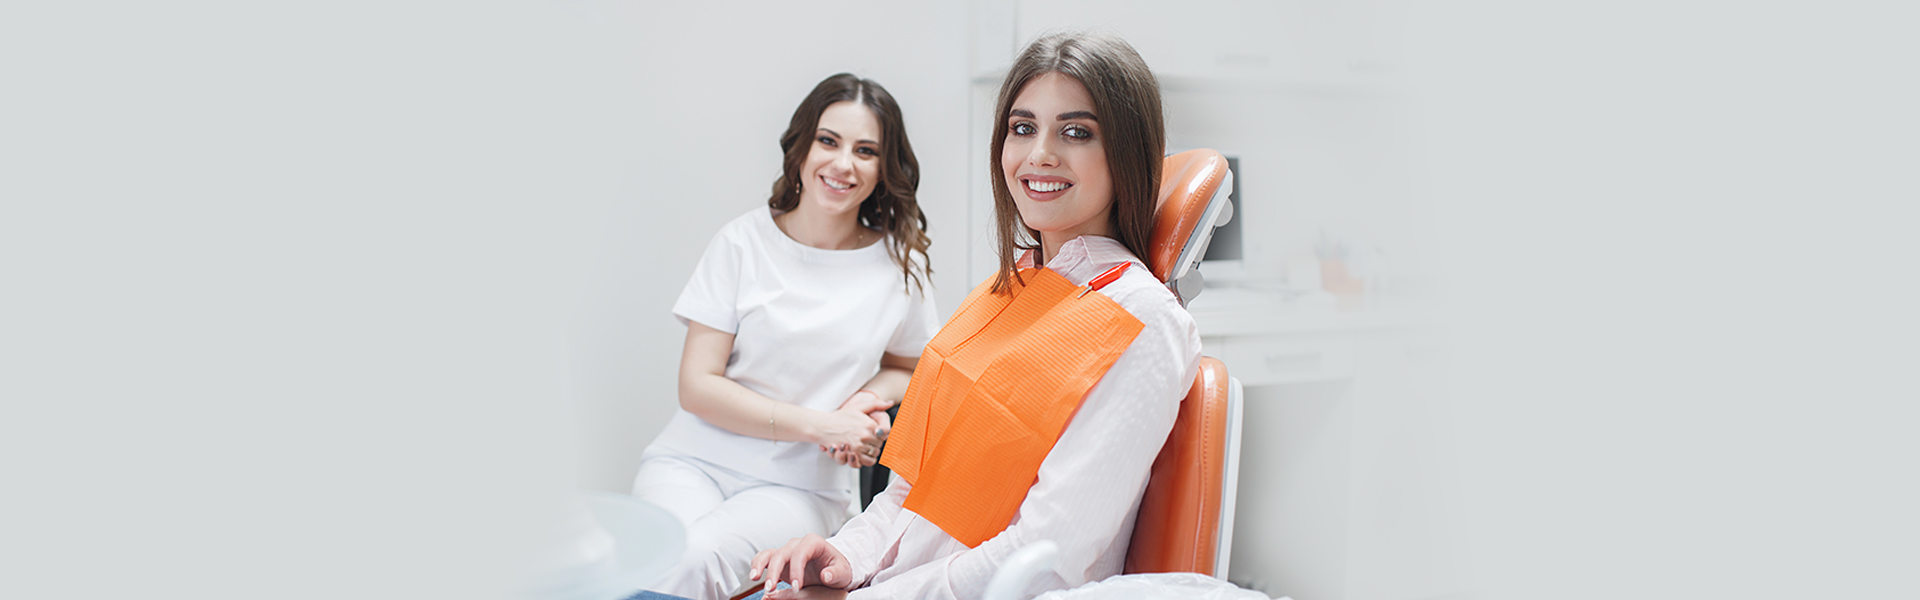 Wisdom Tooth Extraction: Recovery and Aftercare